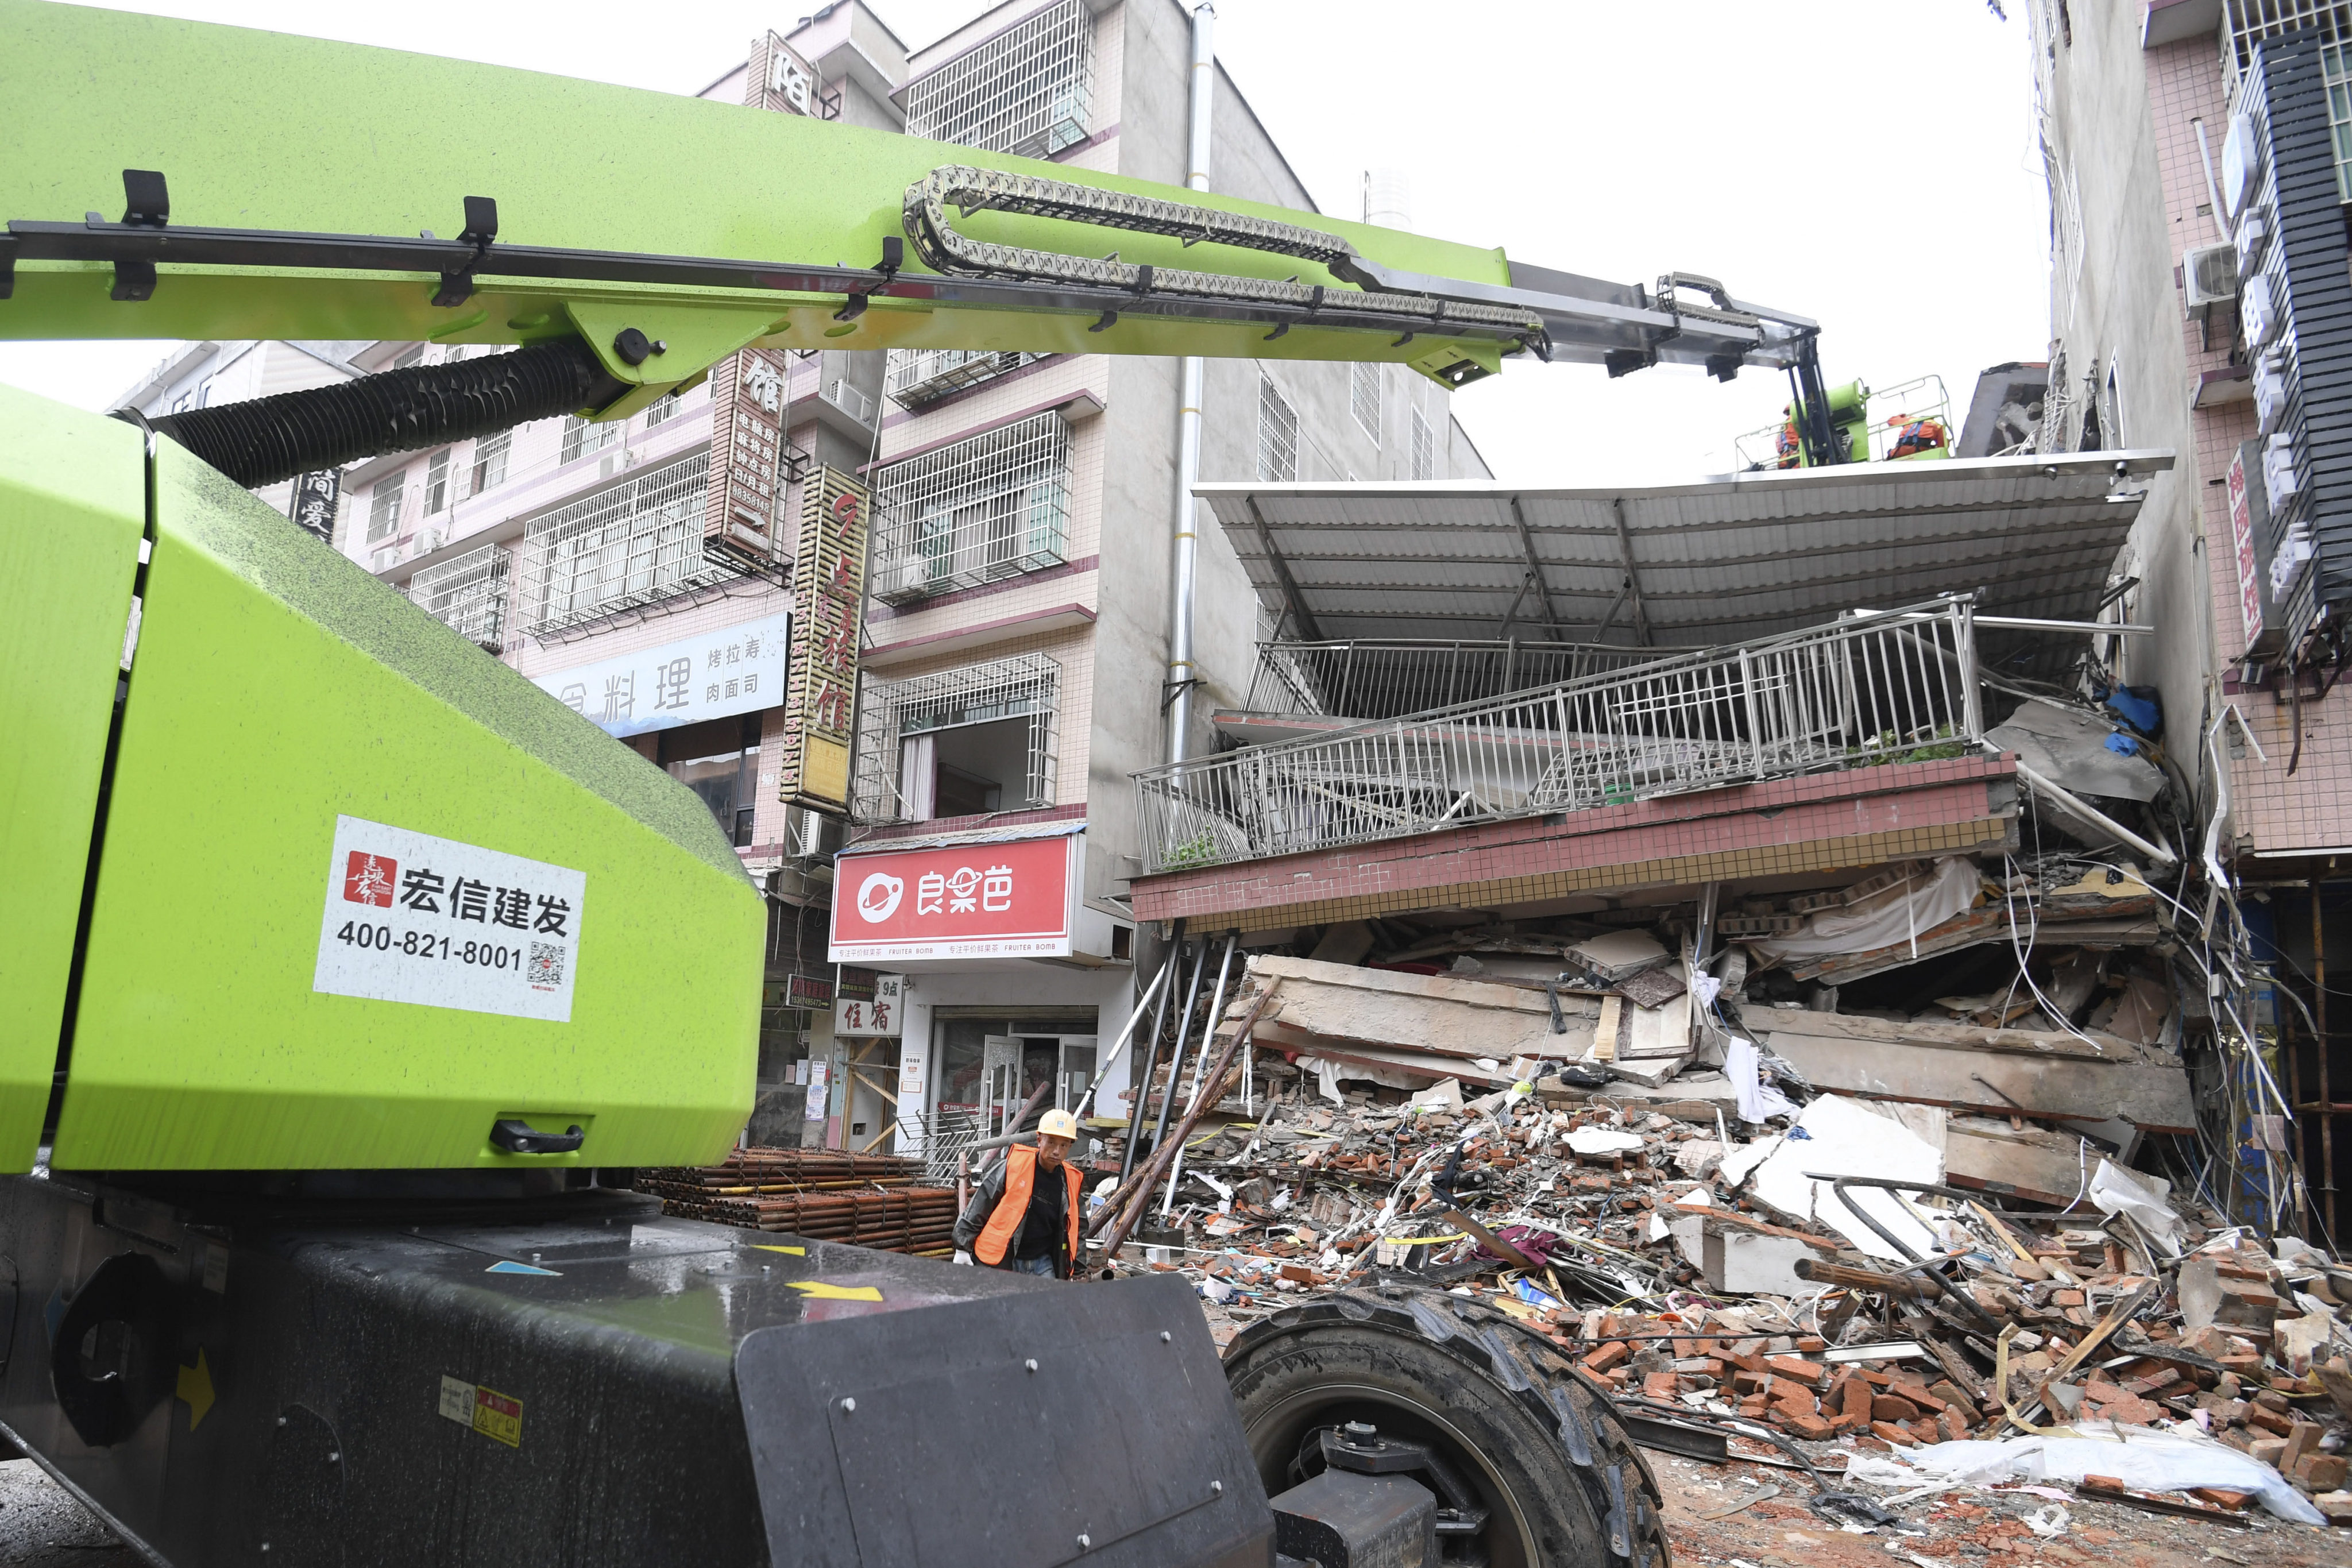 The  building came down on Friday, killing at least two people. Dozens are missing. Photo: Xinhua via AP